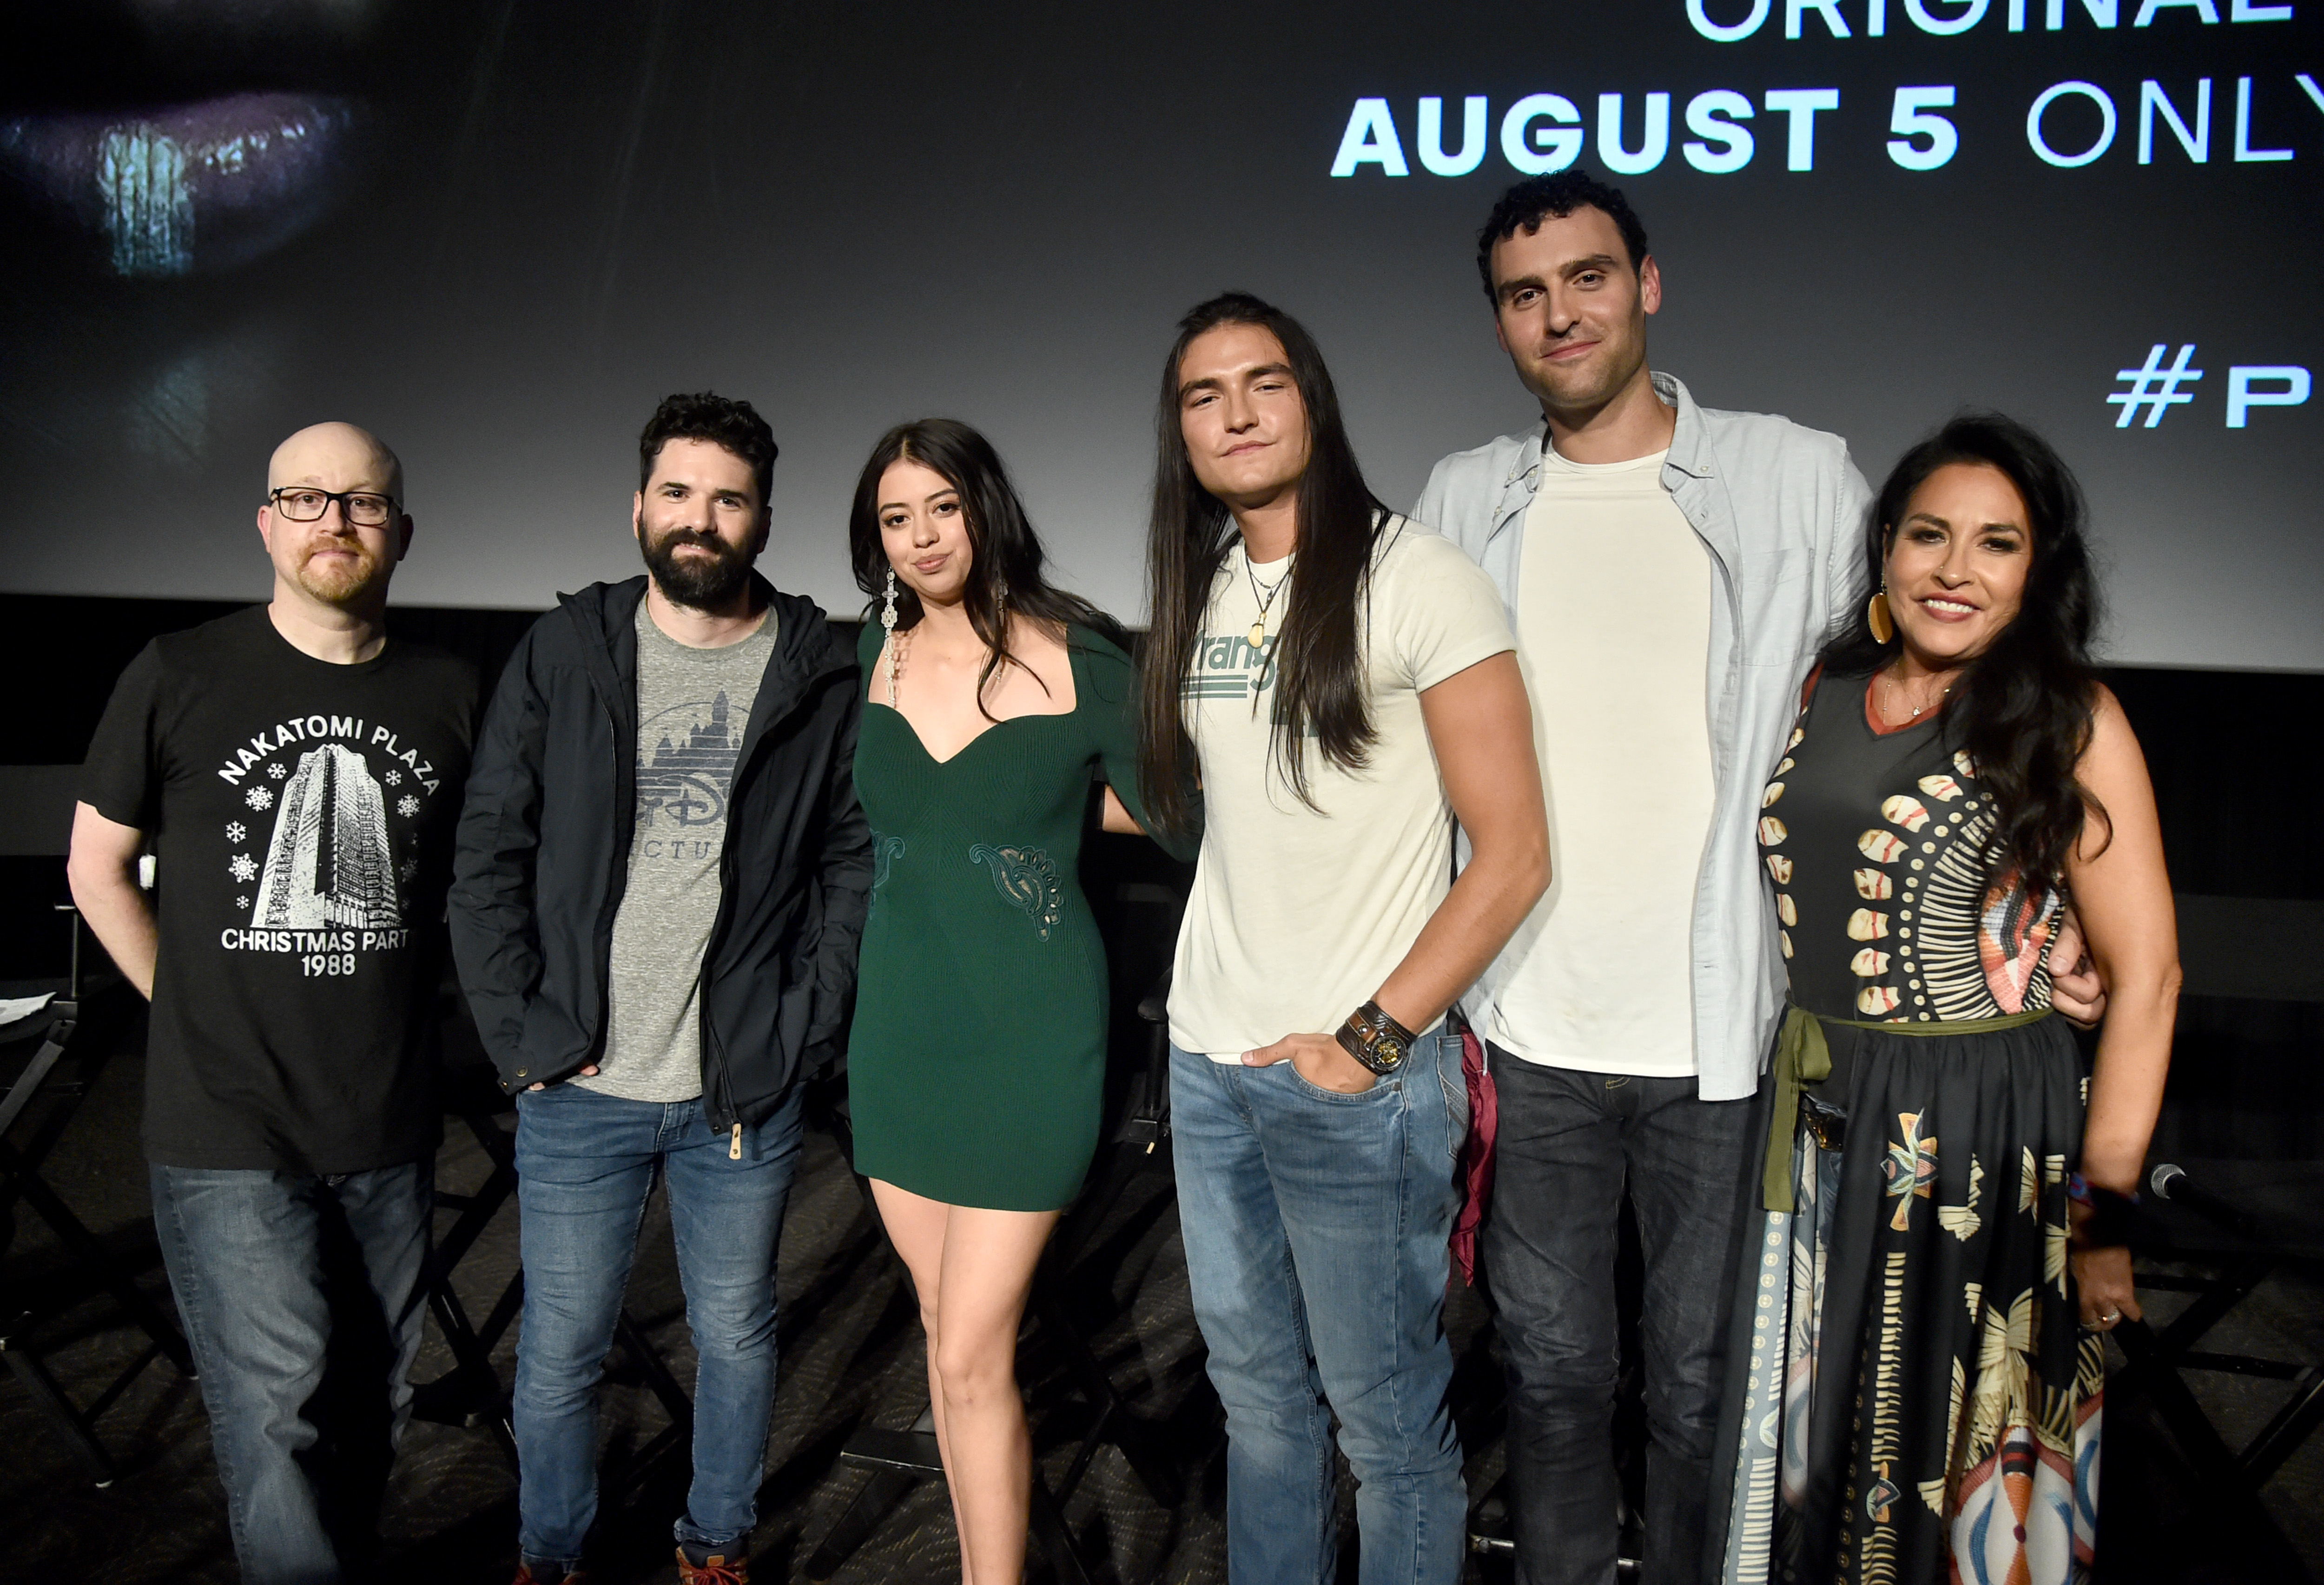 BIRDS OF PREY cast attends fan screening in Mexico City - Get Your Comic On